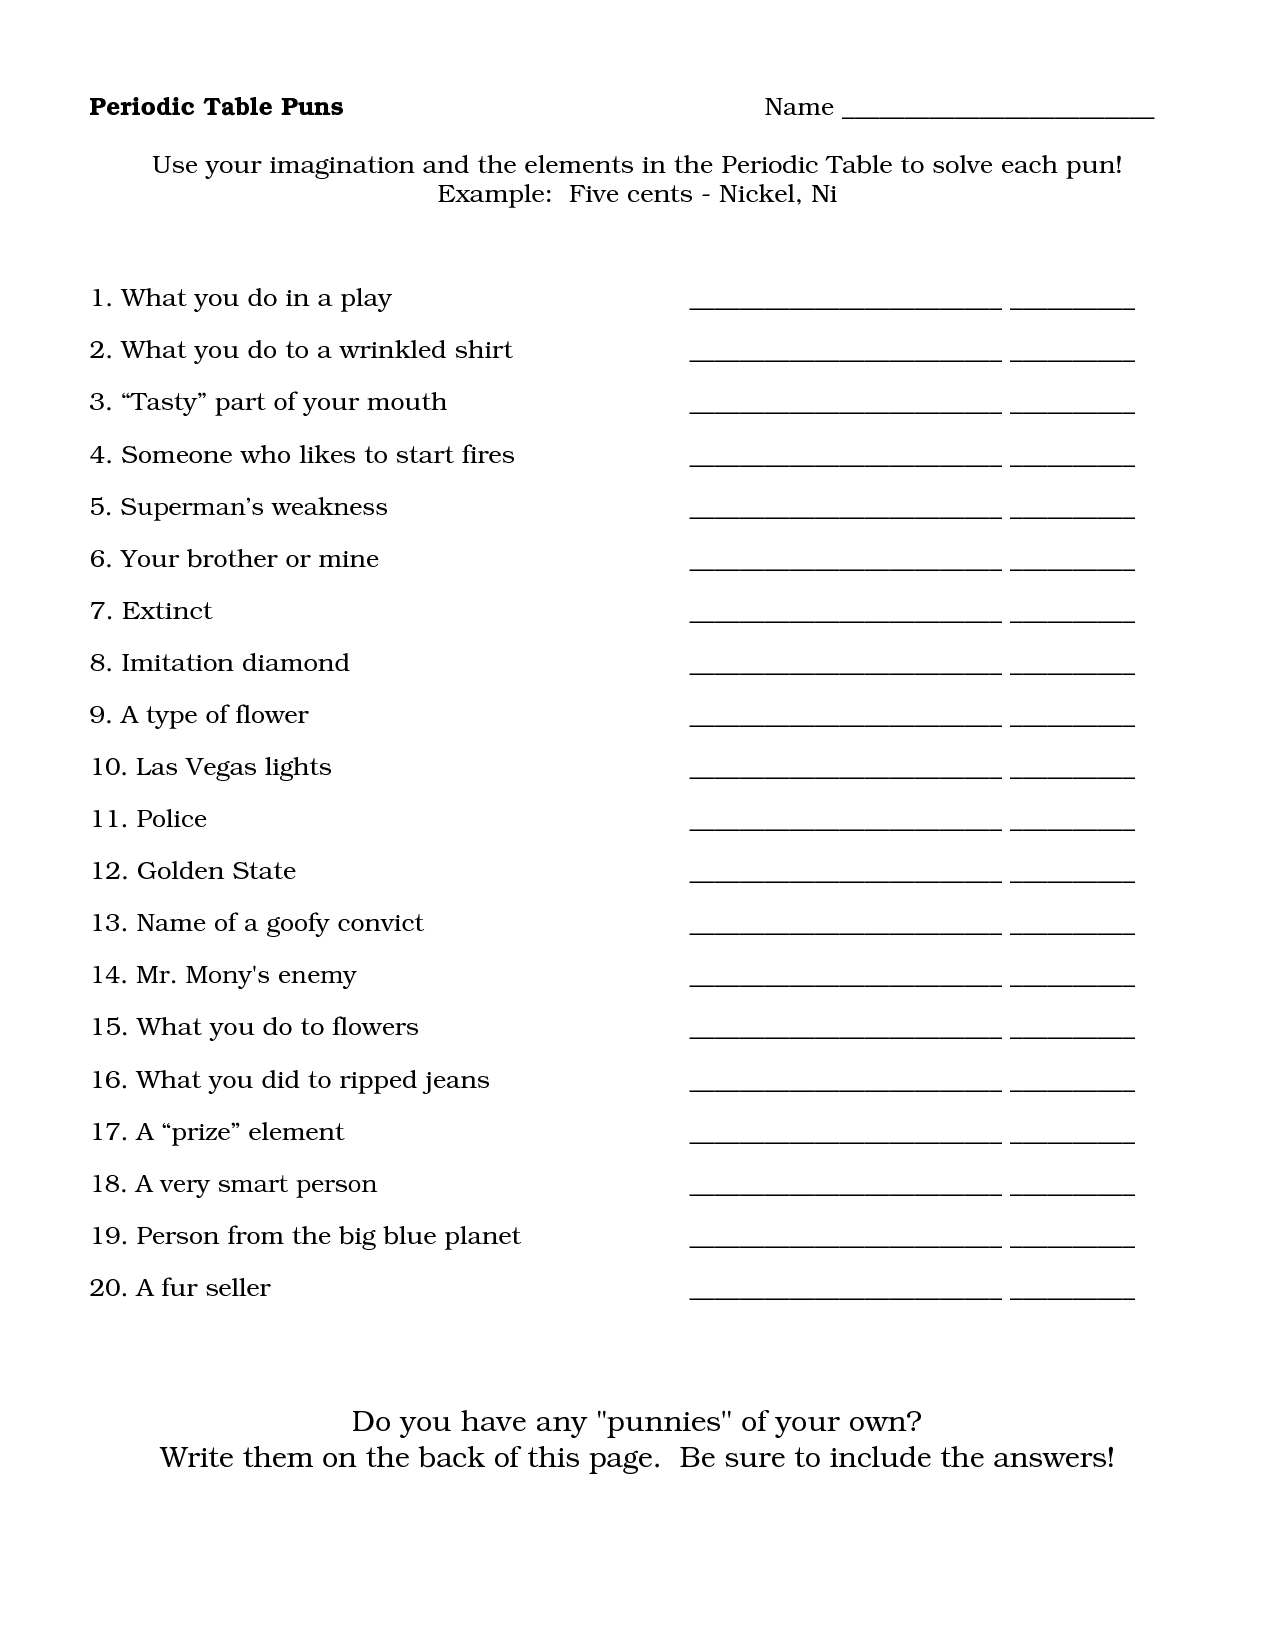 Free Worksheets For Teachers 19 Best Images Of Worksheets For Teachers 